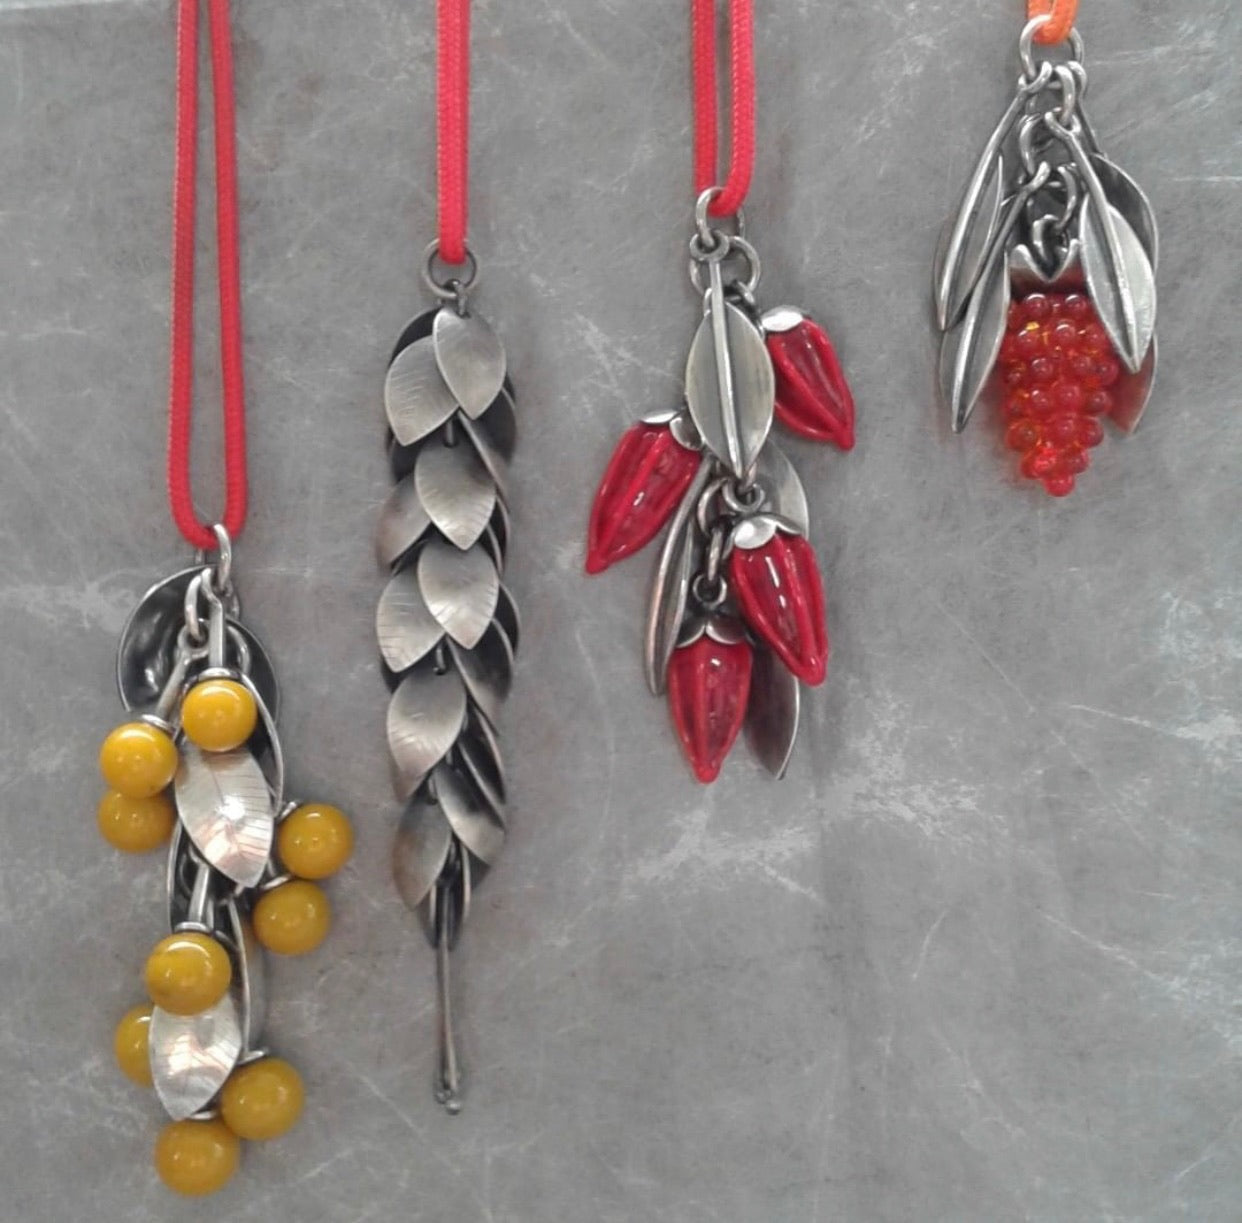 Four necklaces in a row made of silver with different coloured beads